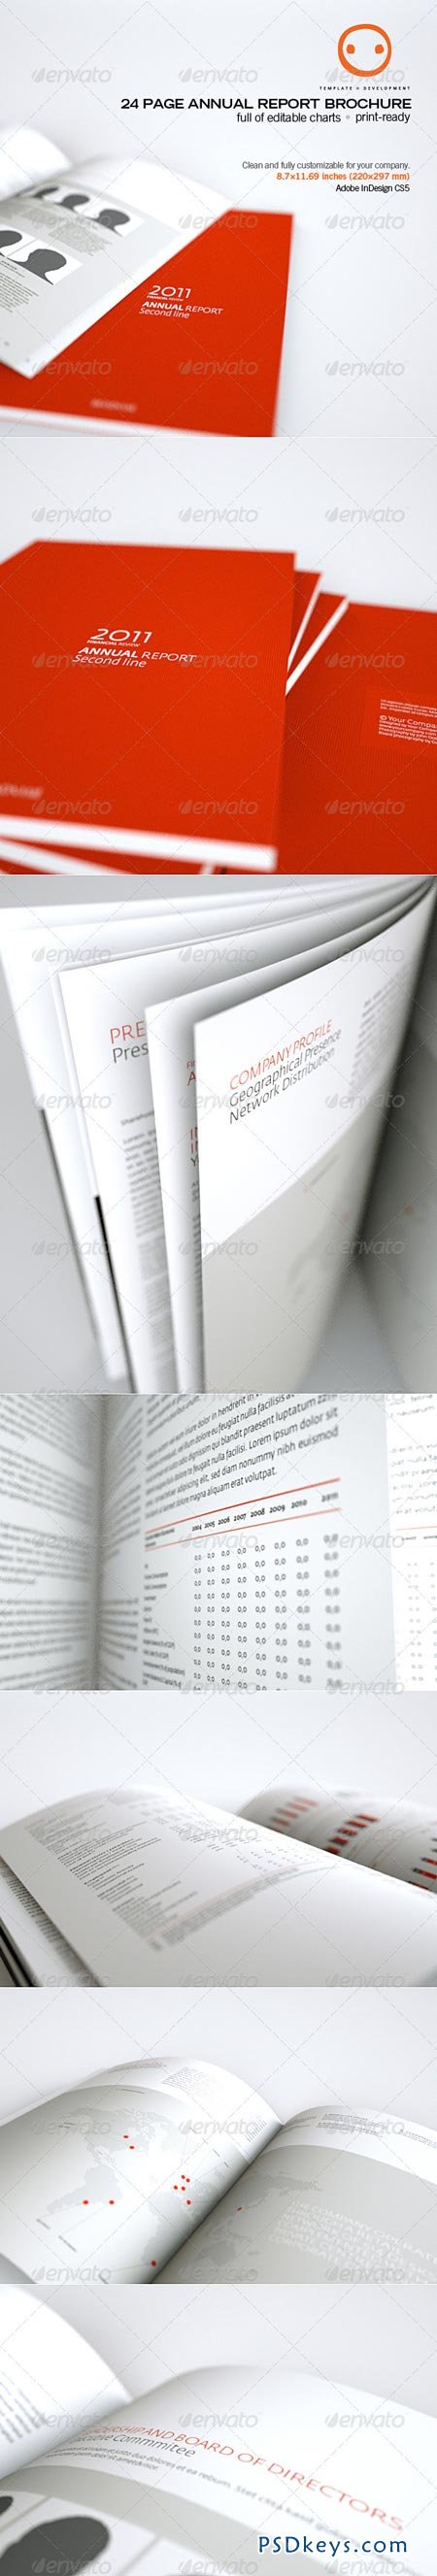 24 Page Annual Report Brochure 686159